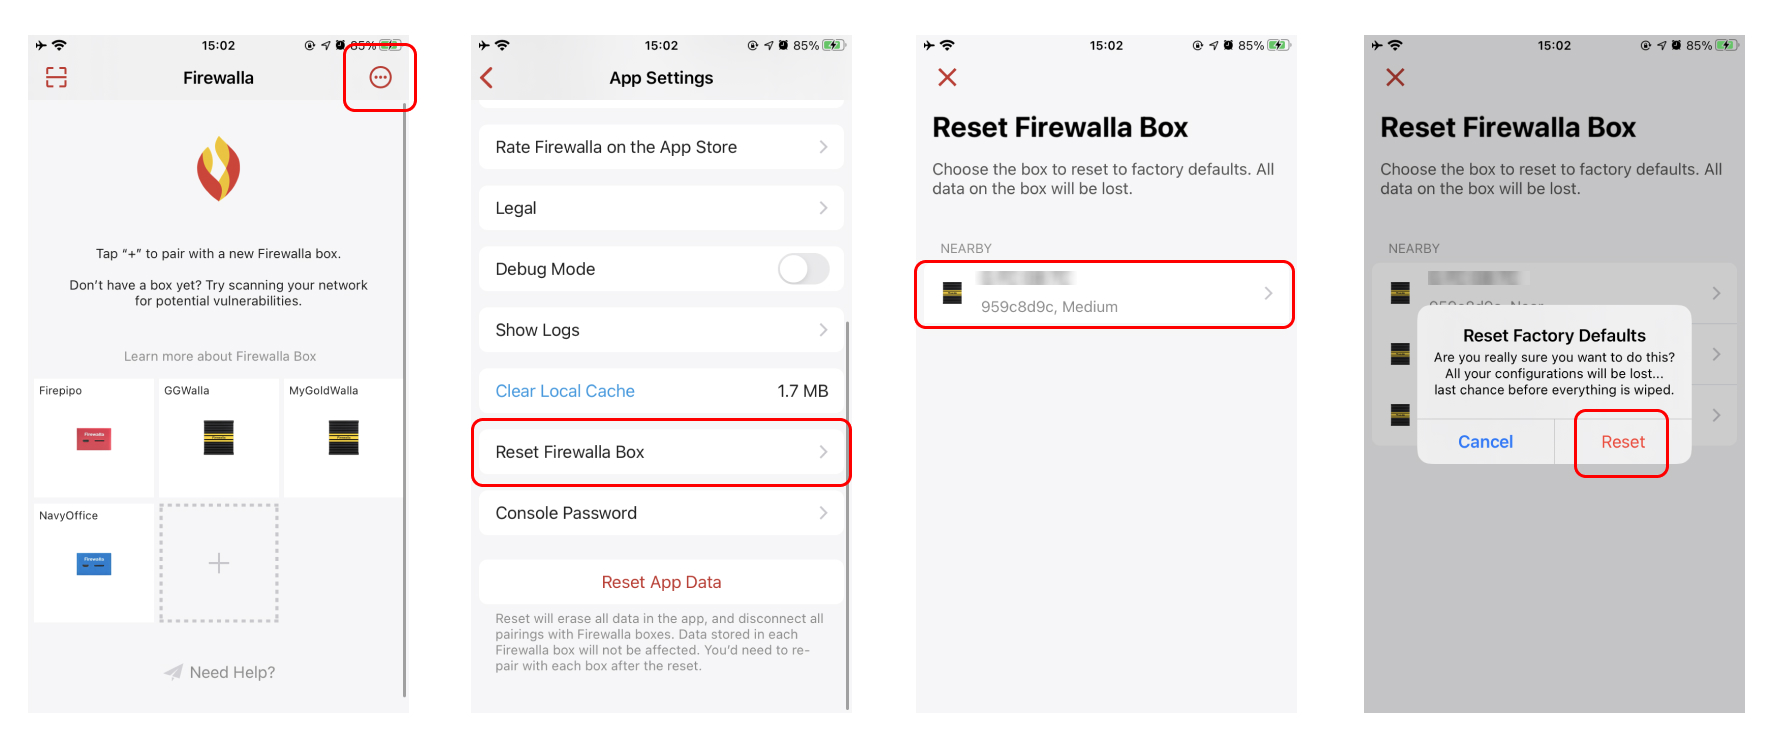 Reset Firewalla Gold and Gold Plus Series Boxes within the Firewalla app settings